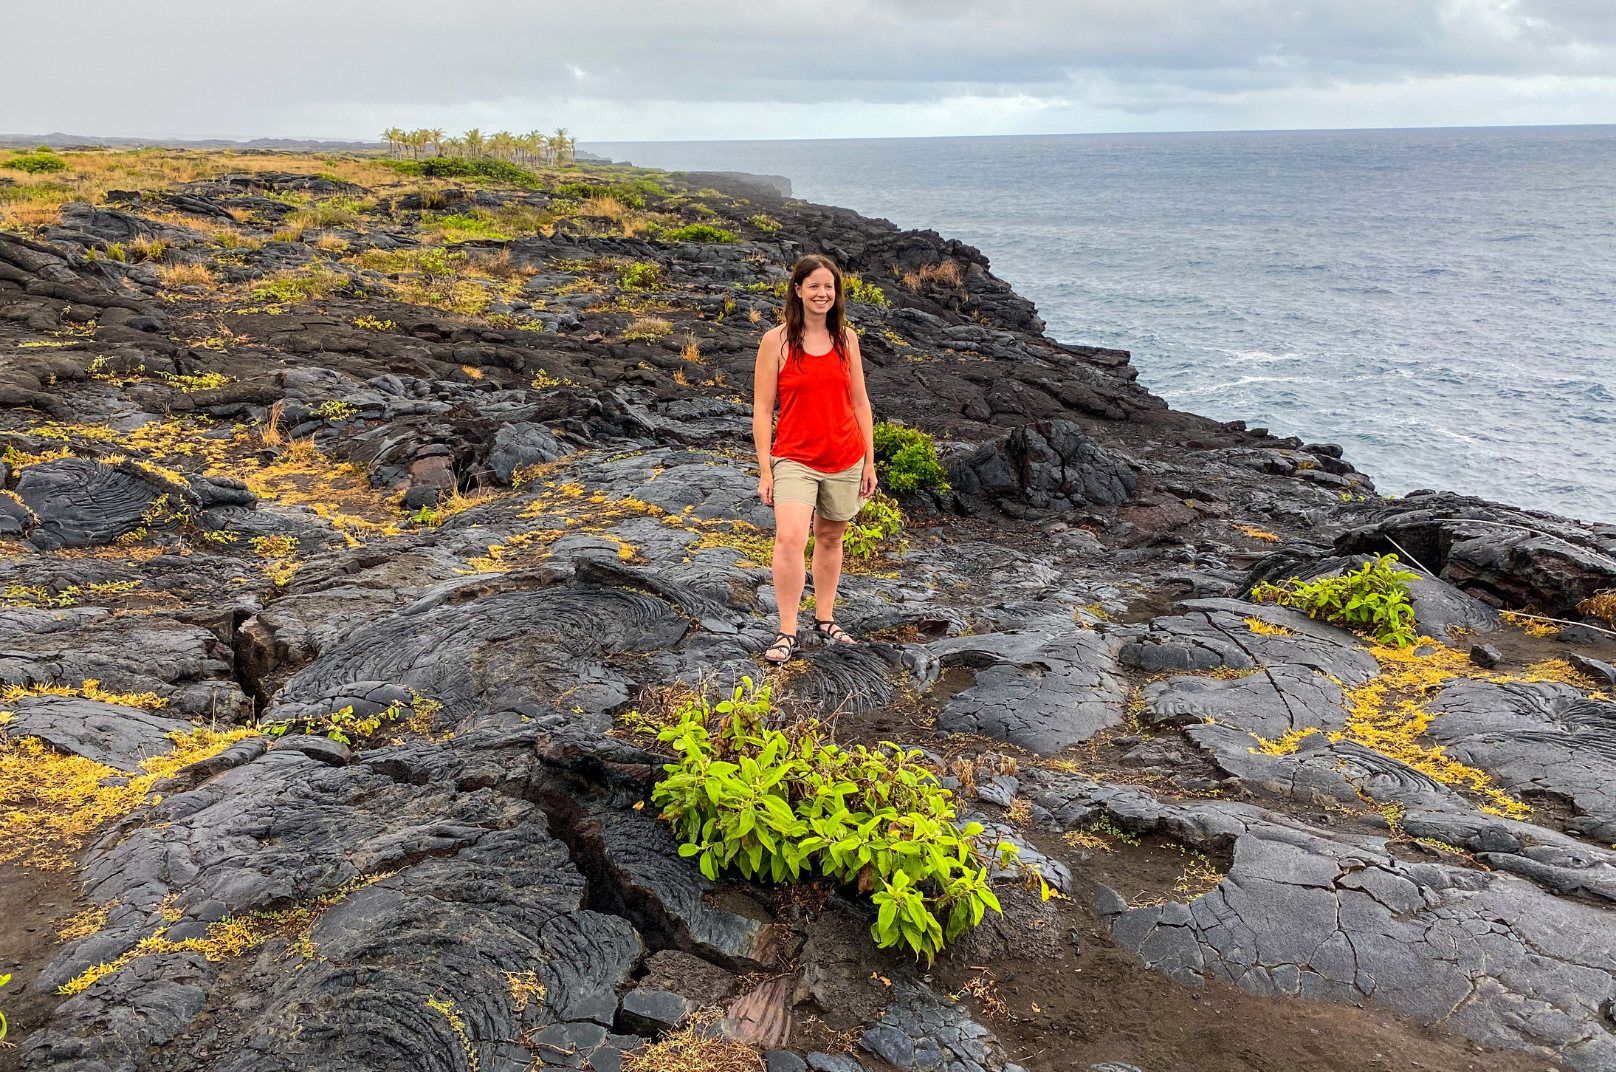 Self-Guided Tour of Hawai'i Volcanoes National Park